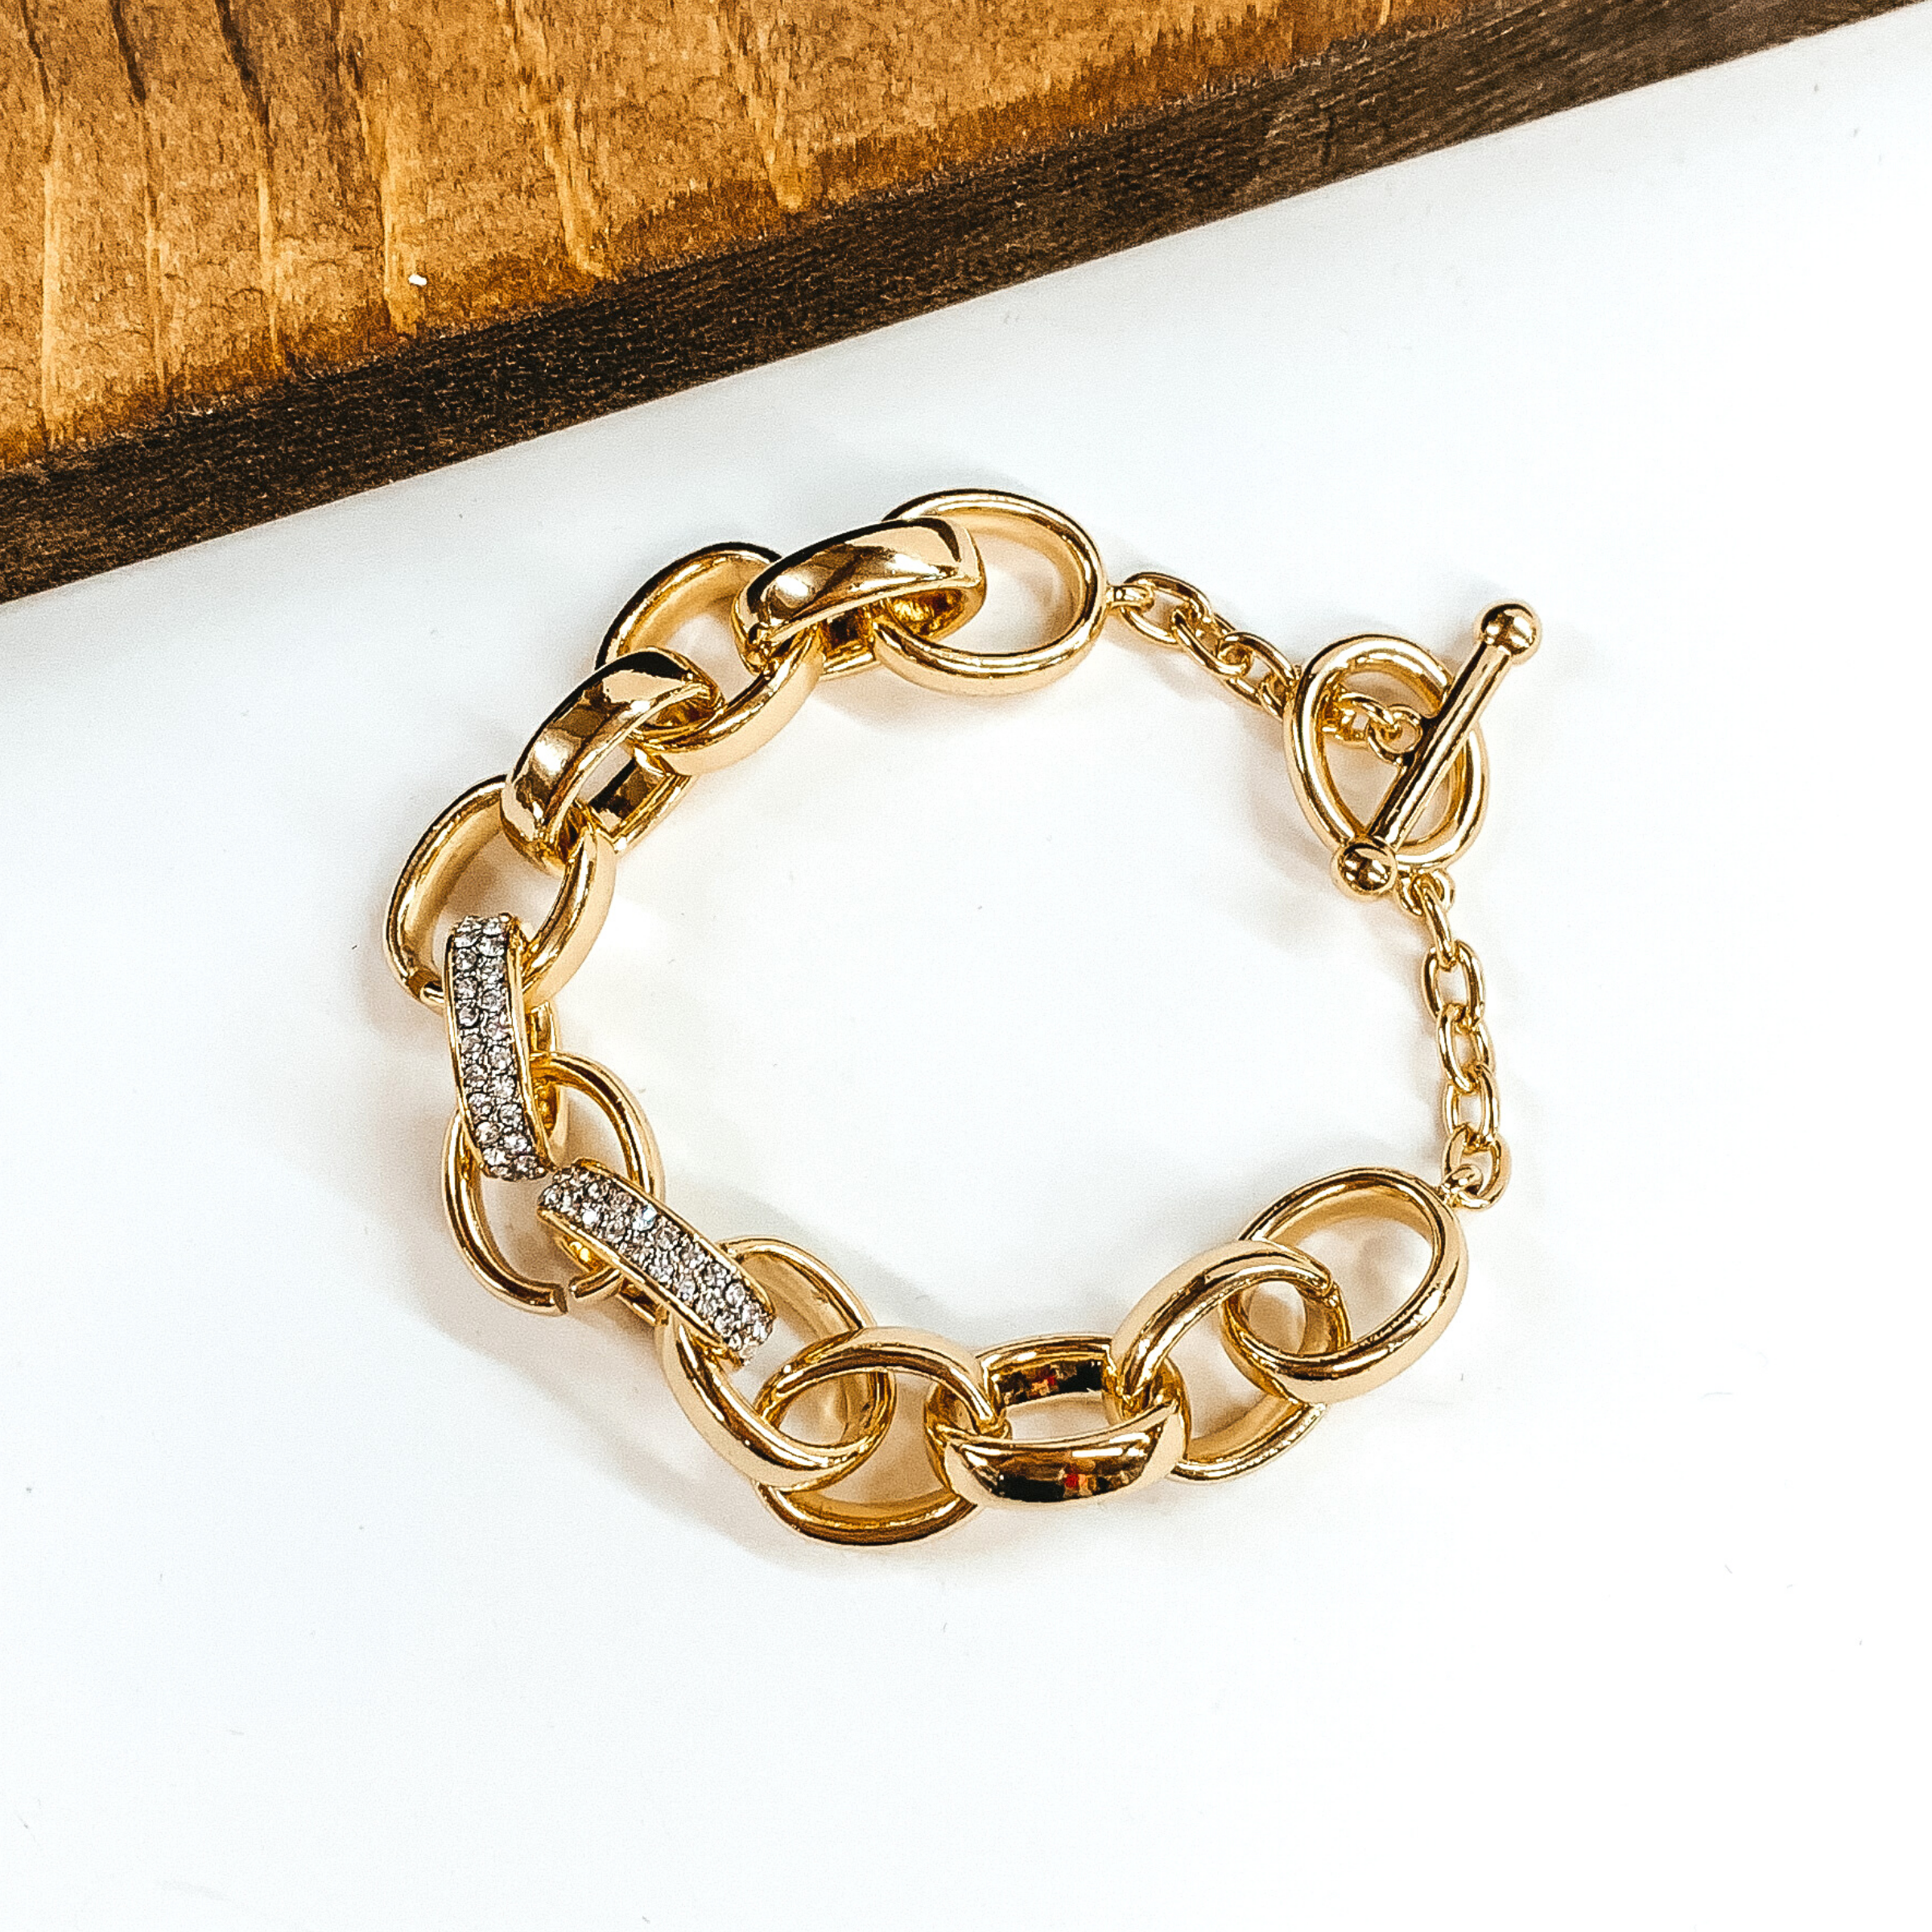 Thick, gold chained bracelet with two chains covered in clear crystals. This bracelet has a toggle clasp. This bracelet is pictured on a white background.